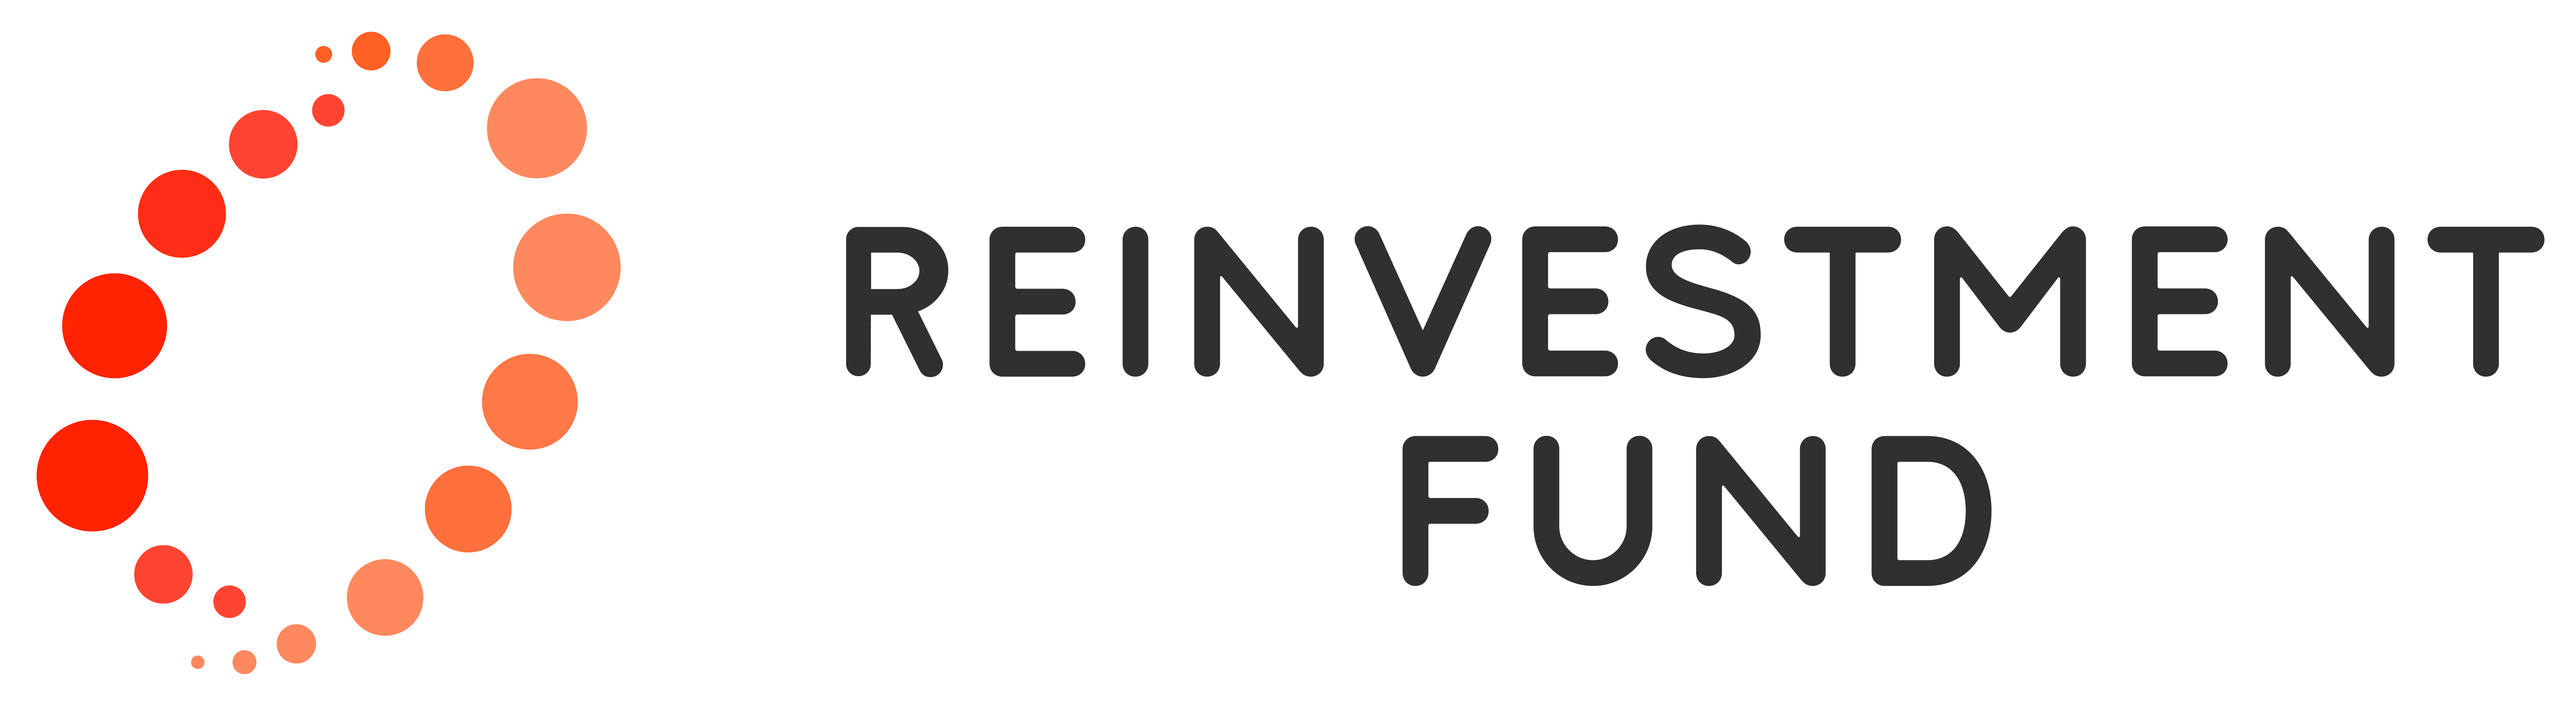 The Reinvestment Fund, Inc.